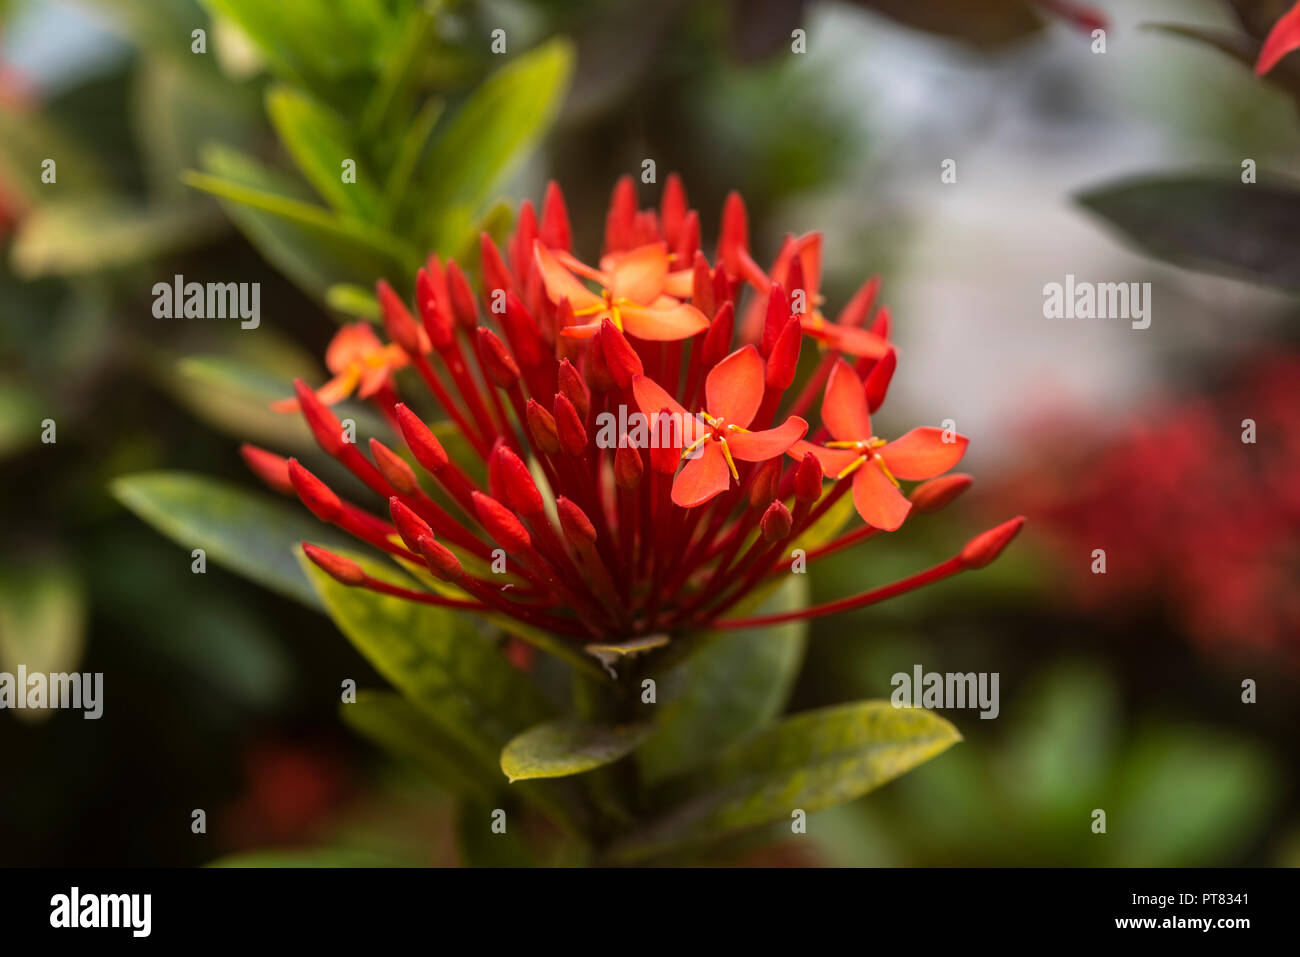 Ixora chinensis flowers in bloom, with leaves below Stock Photo